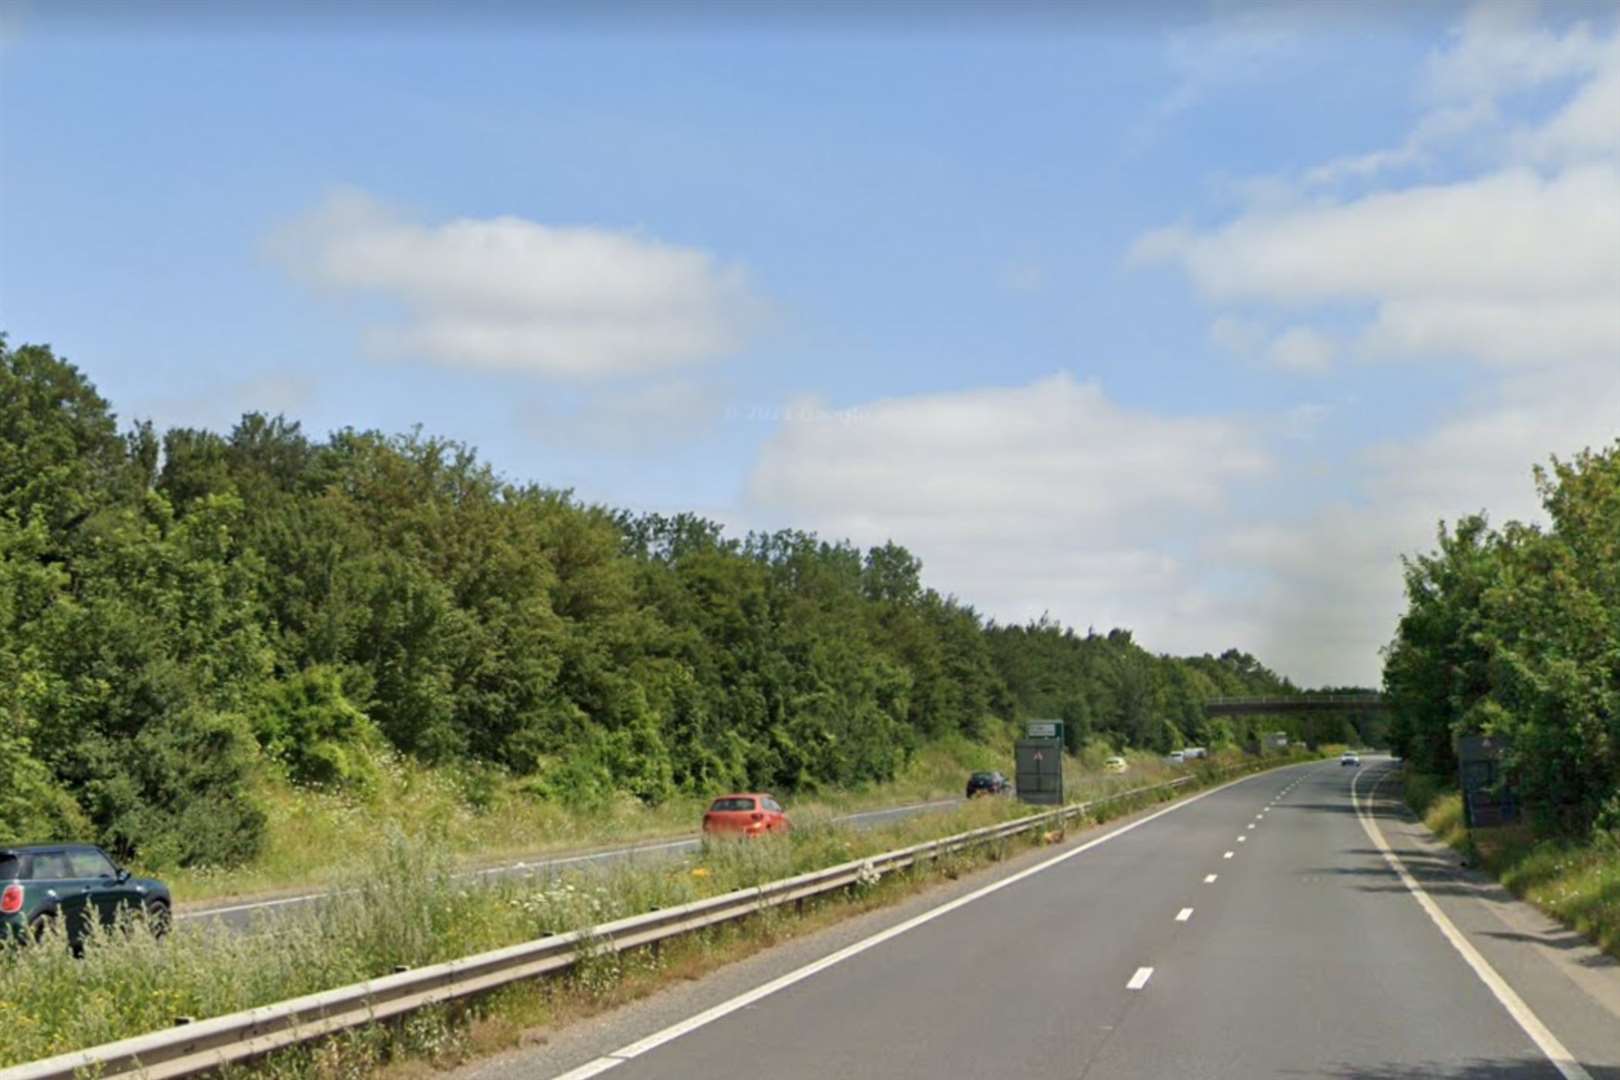 Work on the A2 planned for overnight has been postponed. Picture: Google Maps